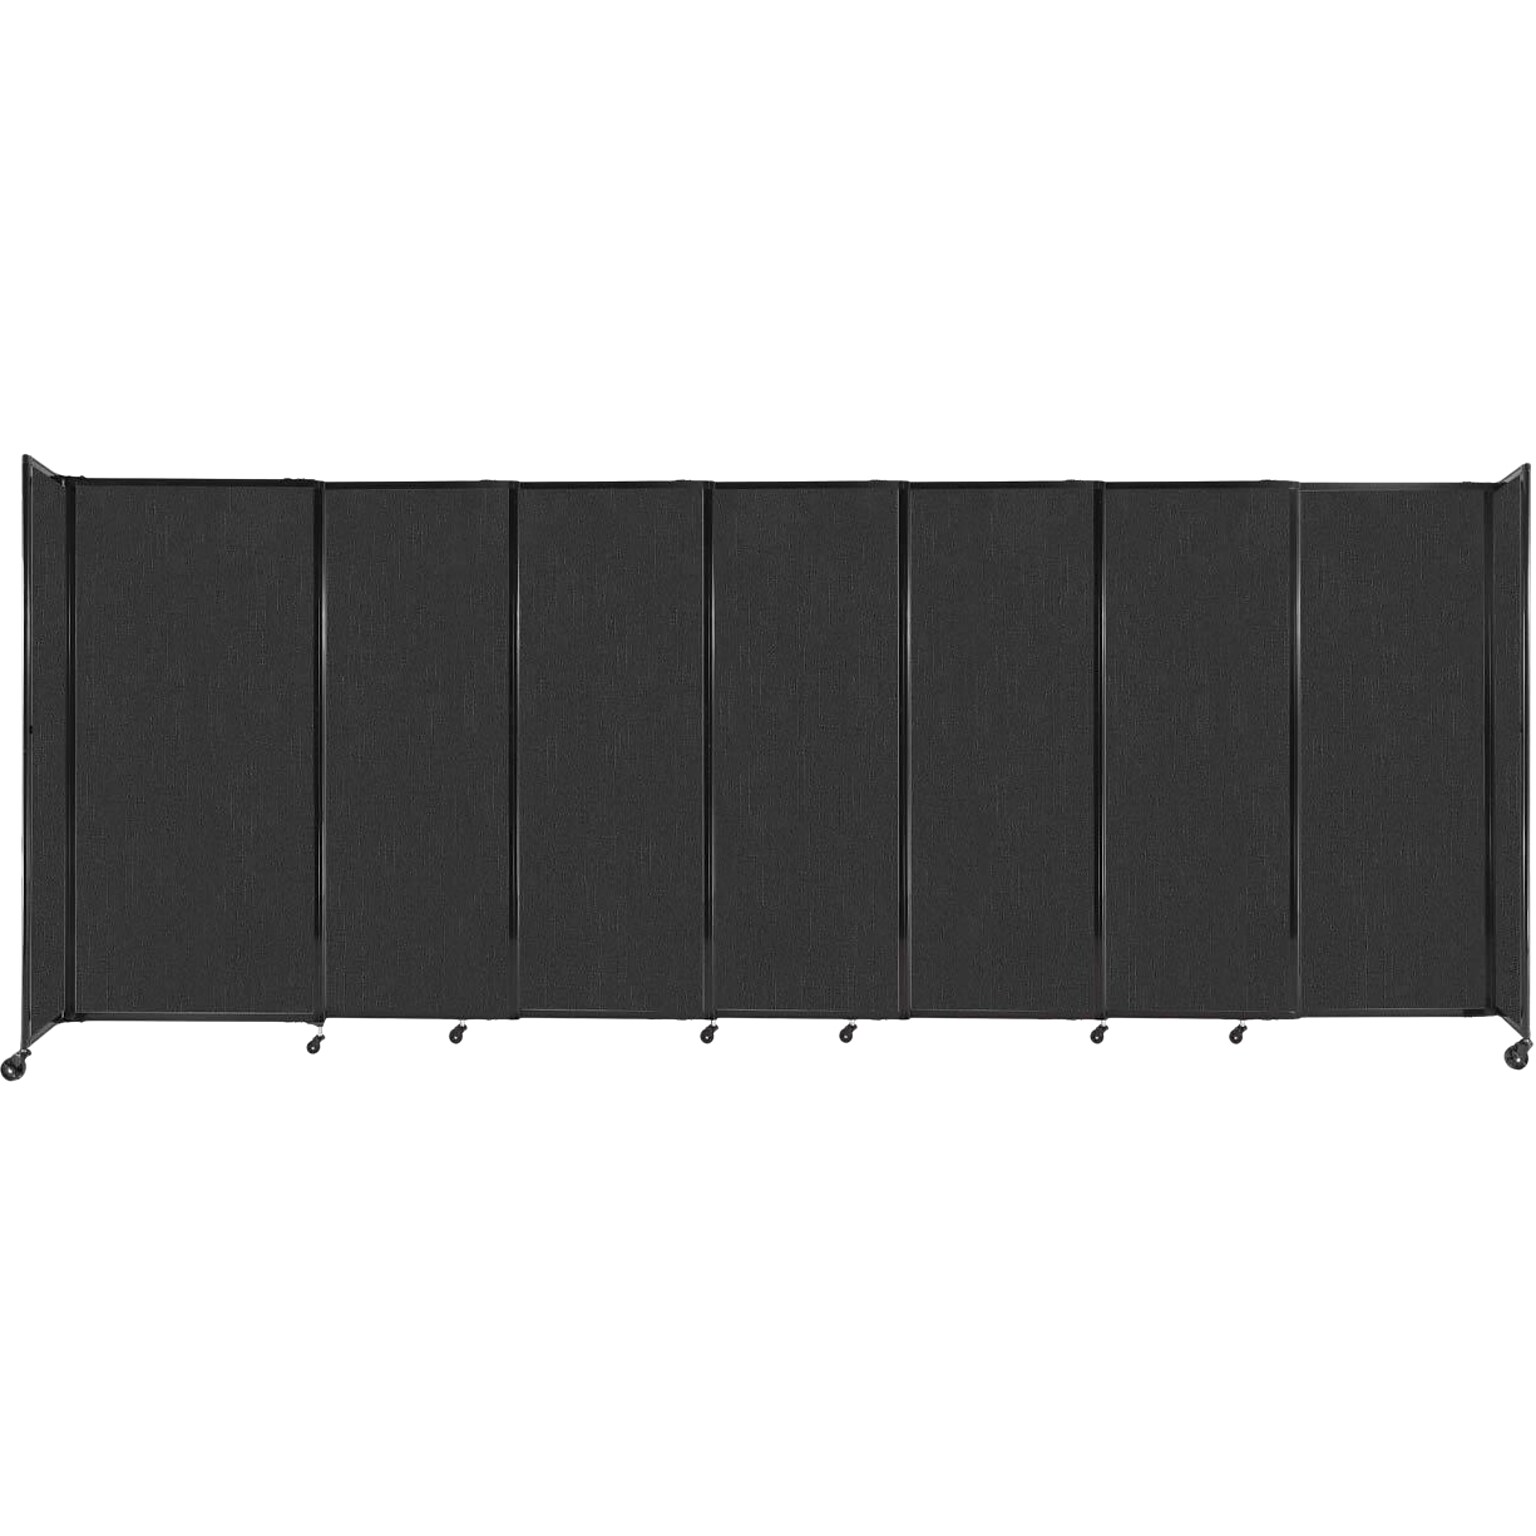 Versare StraightWall Freestanding Mobile Partition, 72H x 186W, Black Fabric (1472702)